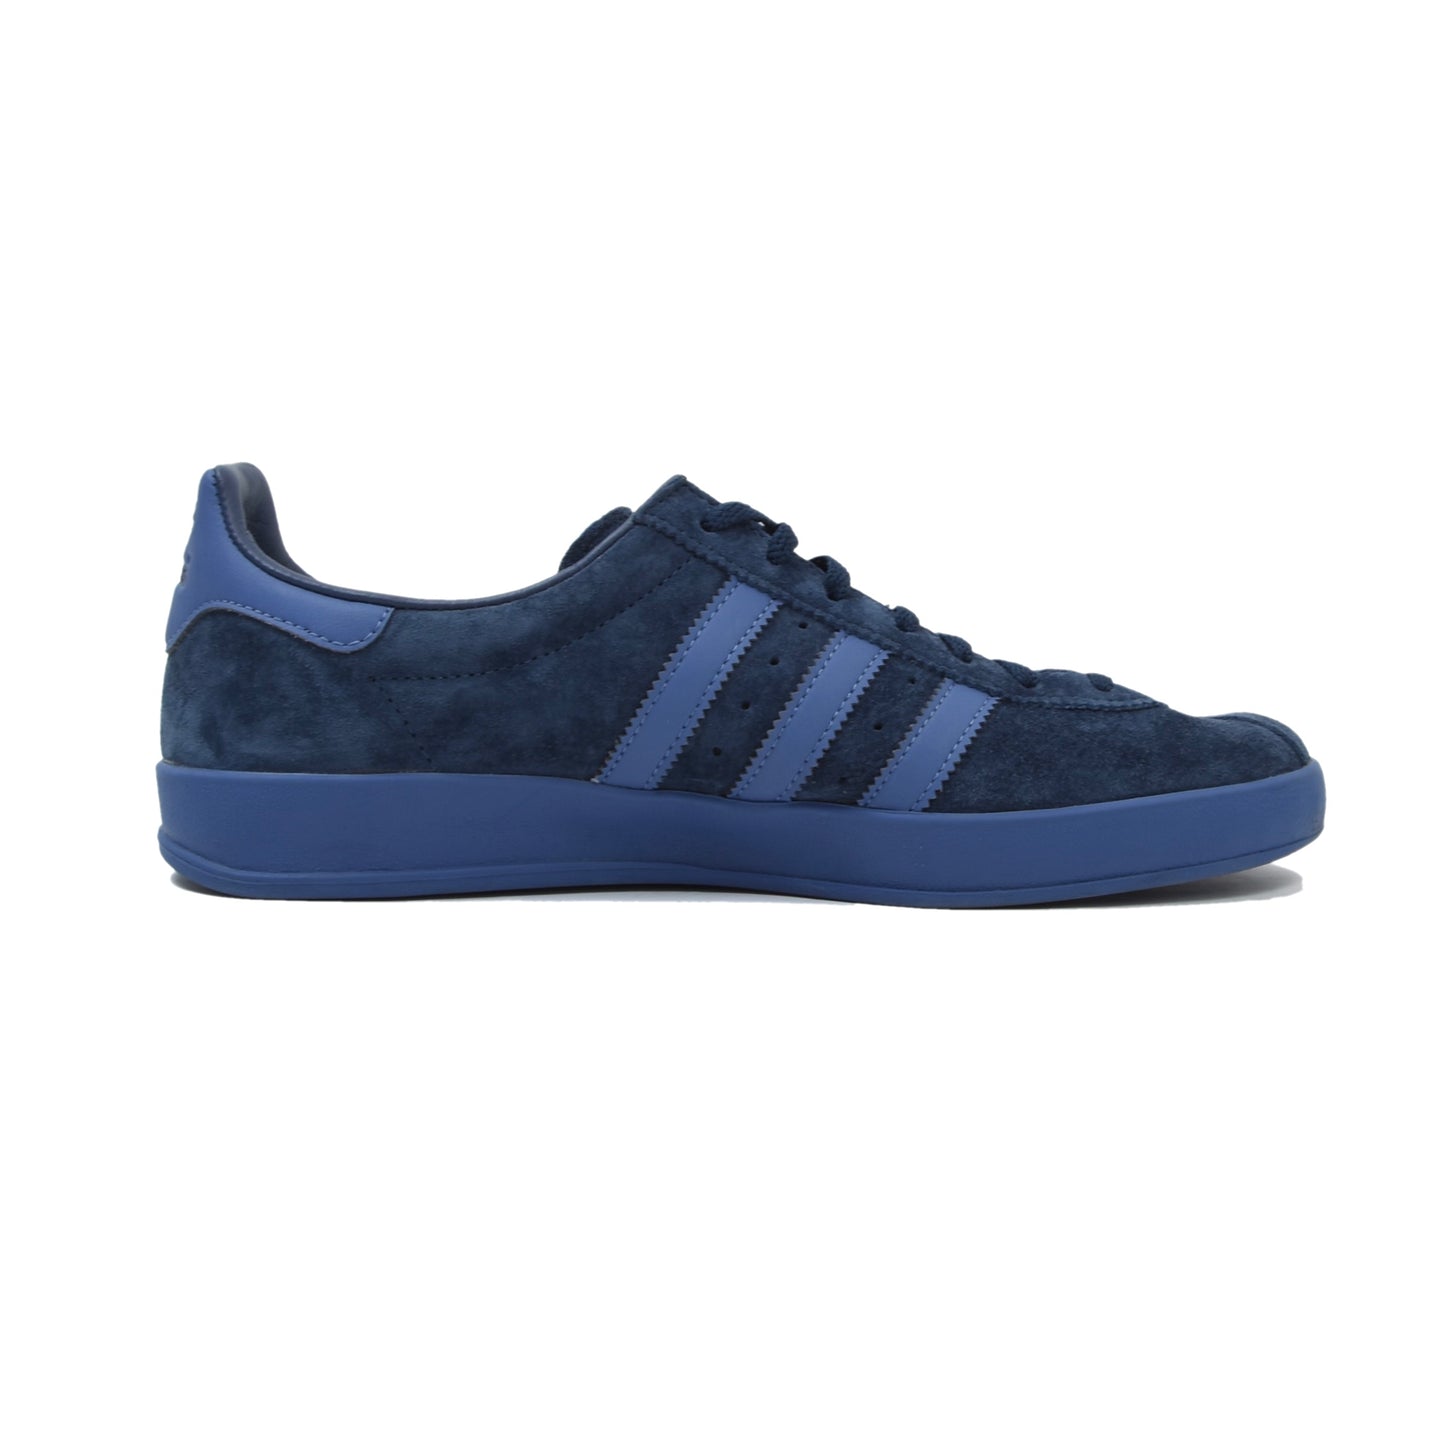 Adidas Broomfield Suede Sneakers Size 43 1/3 - Blue